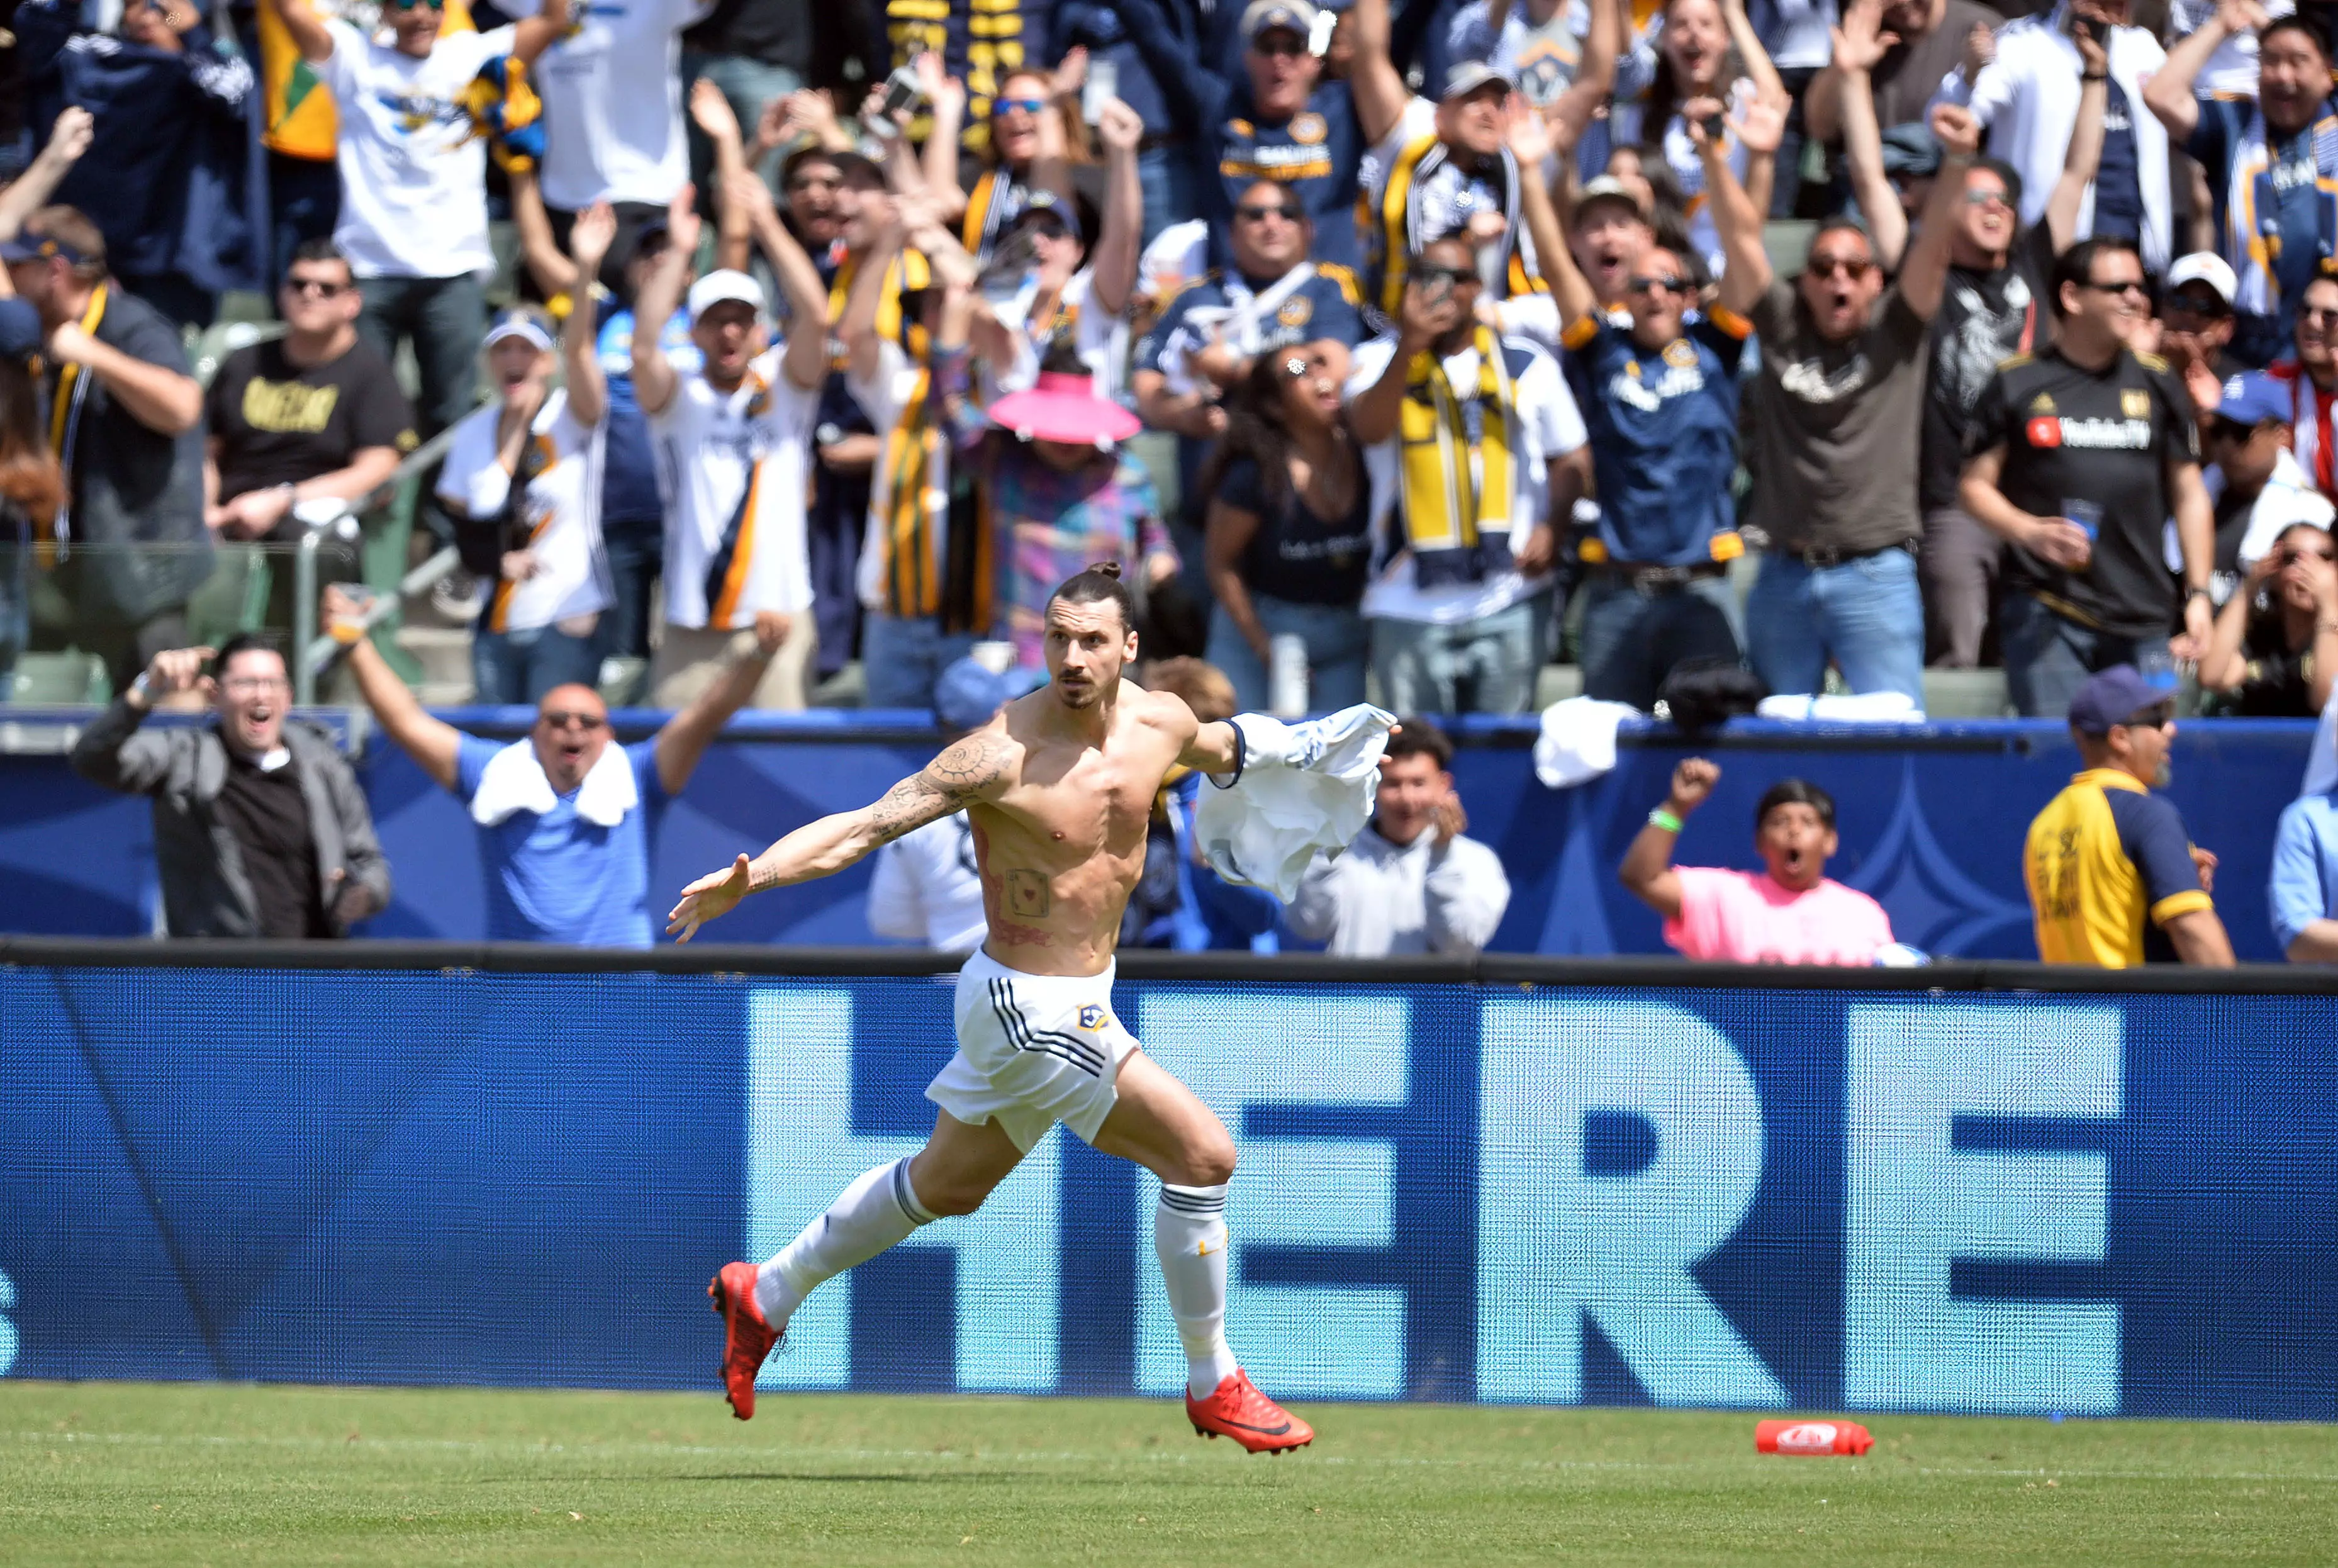 Ibra celebrates his first goal for Galaxy. Image: PA Images